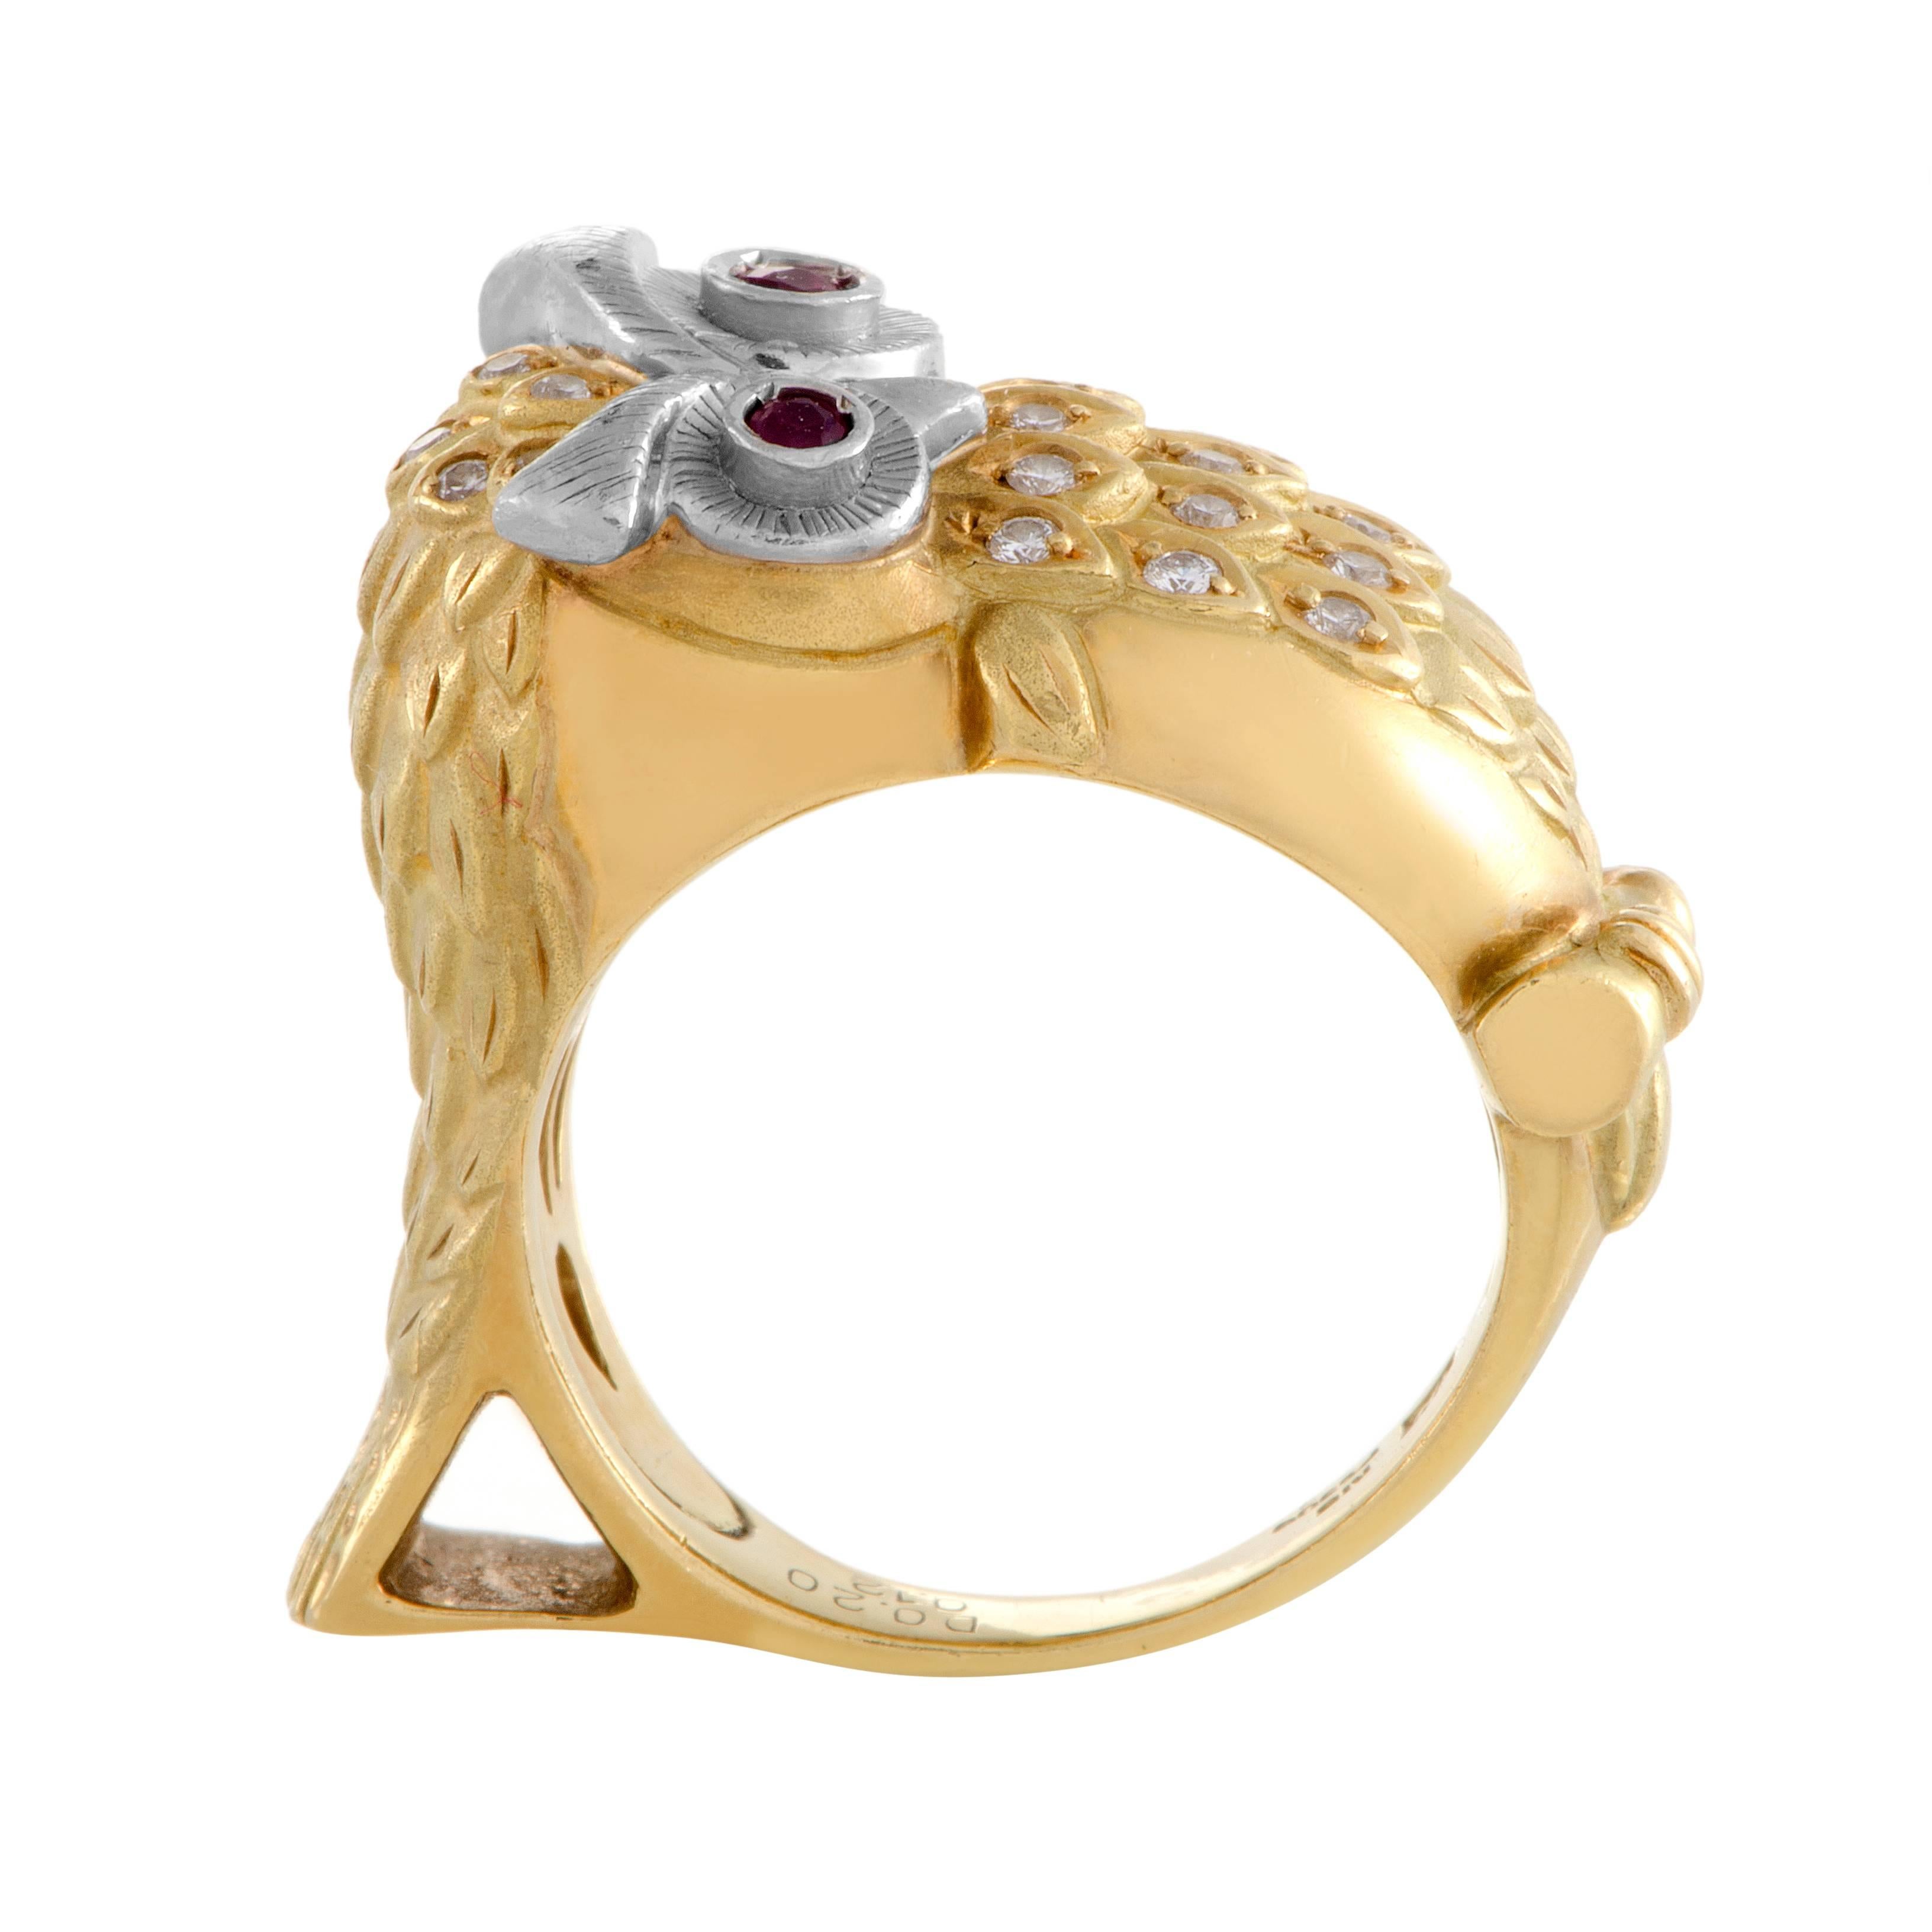 The adorable and compelling motif of an owl is presented in a fine blend of 18K yellow gold and platinum adorned with glistening diamonds weighing in total 0.20ct and nifty rubies totaling 0.12ct in this exceptional ring from Mitsuo Kaji.
Included